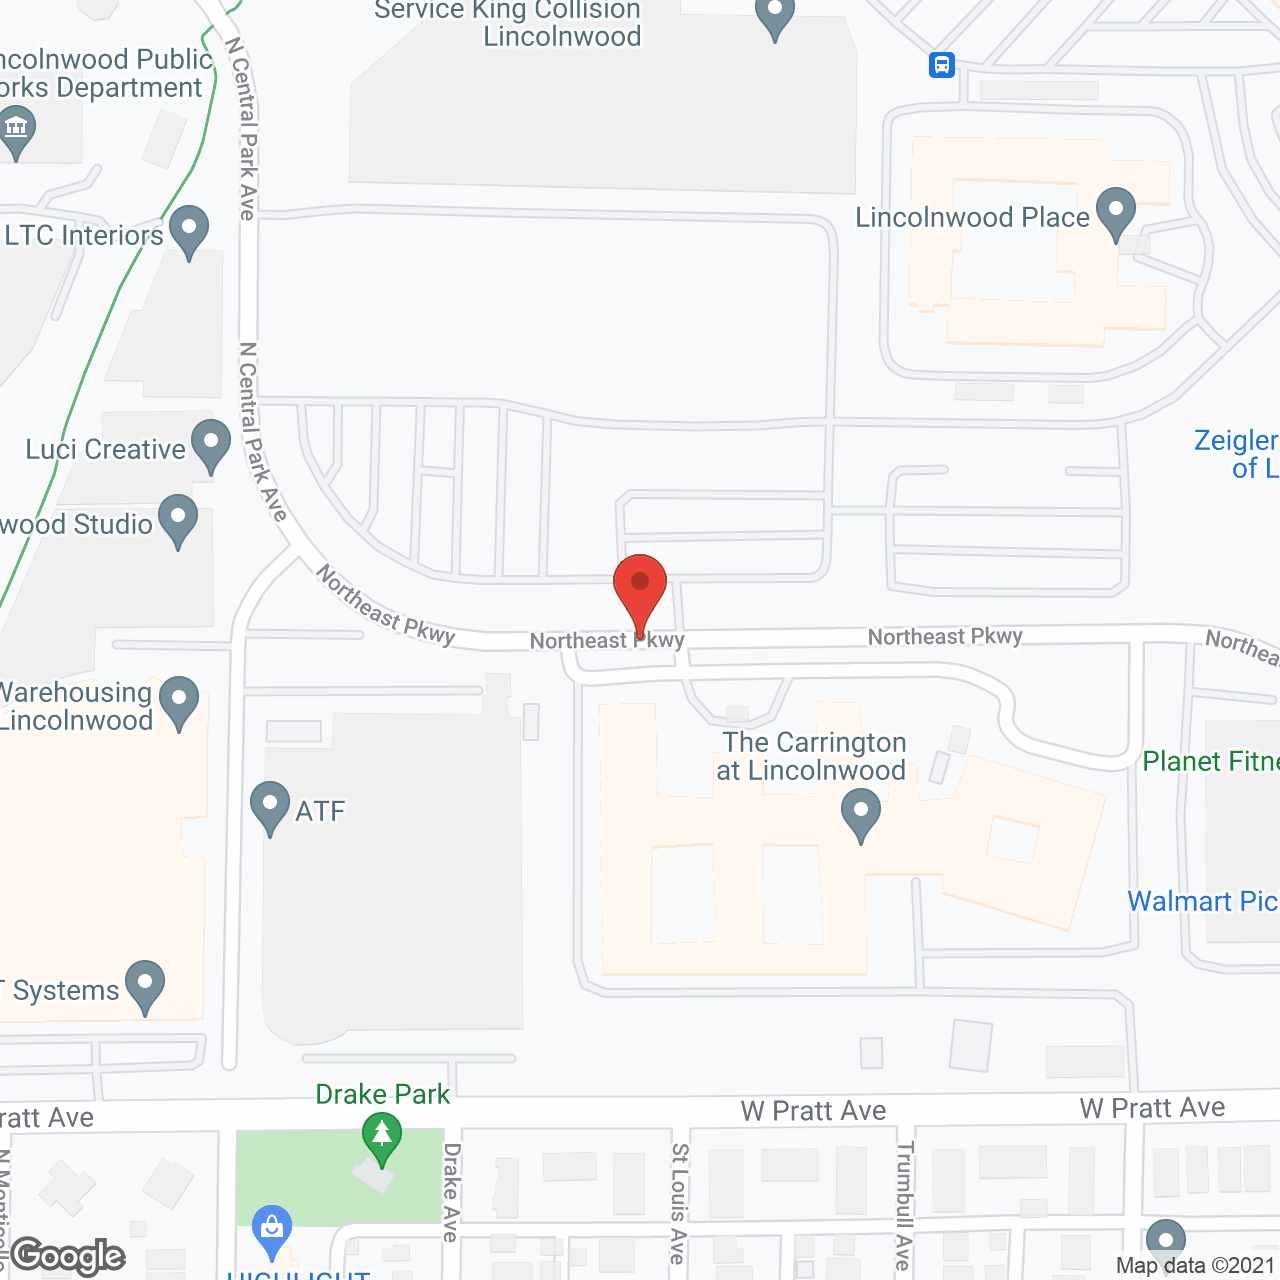 The Carrington at Lincolnwood in google map